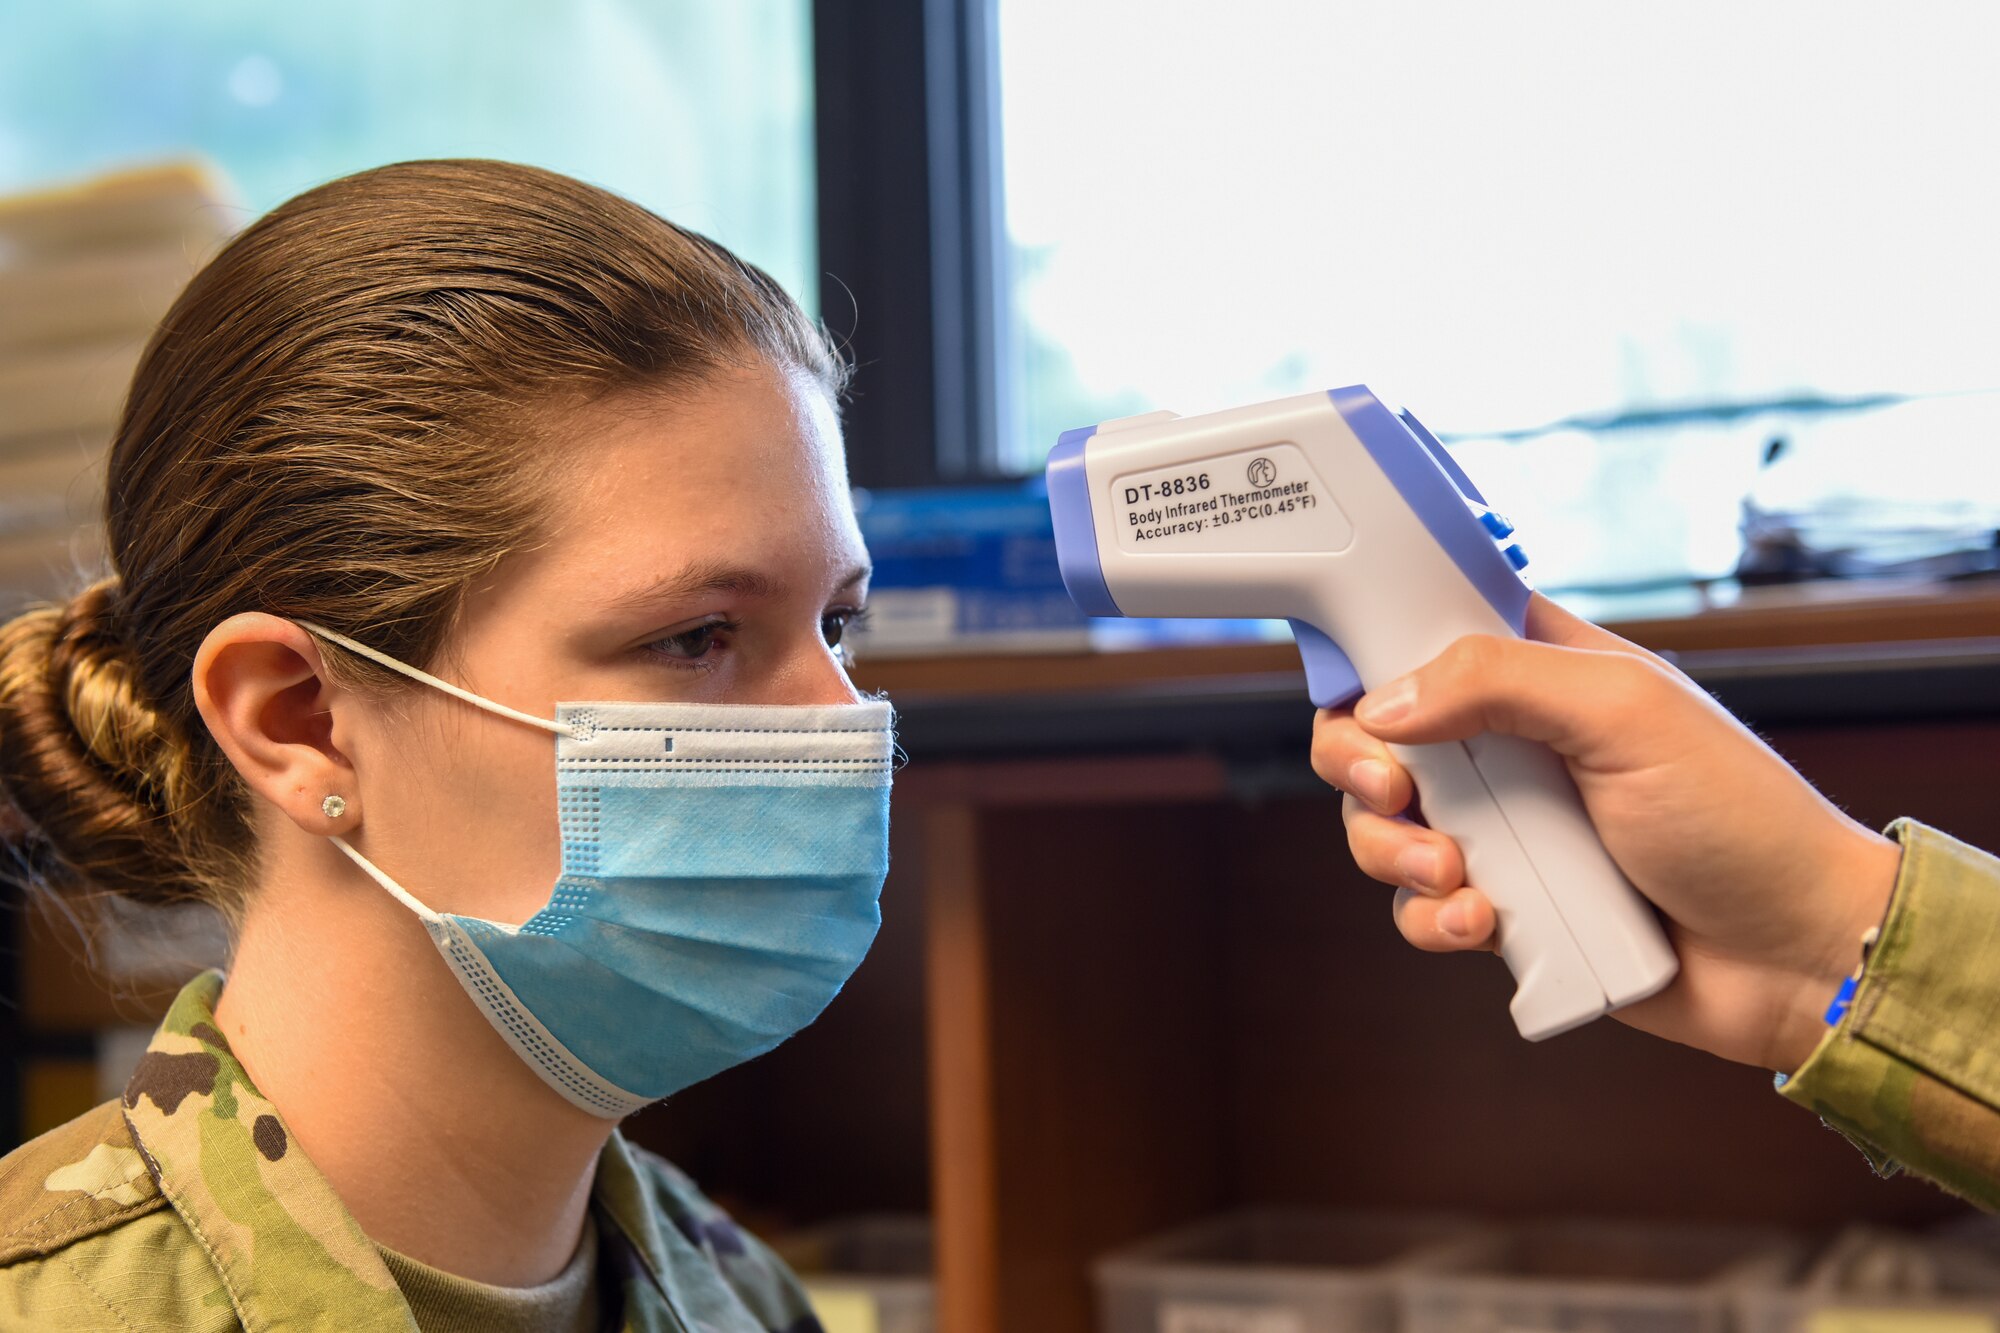 A public health technician takes the temperature of a fellow guardsman at the 171st Air Refueling Wing June 3, 2020. Masks are to be worn at all times except when isolated from others in a private space. (U.S. Air National Guard photo by Senior Airman Zoe M. Wockenfuss)